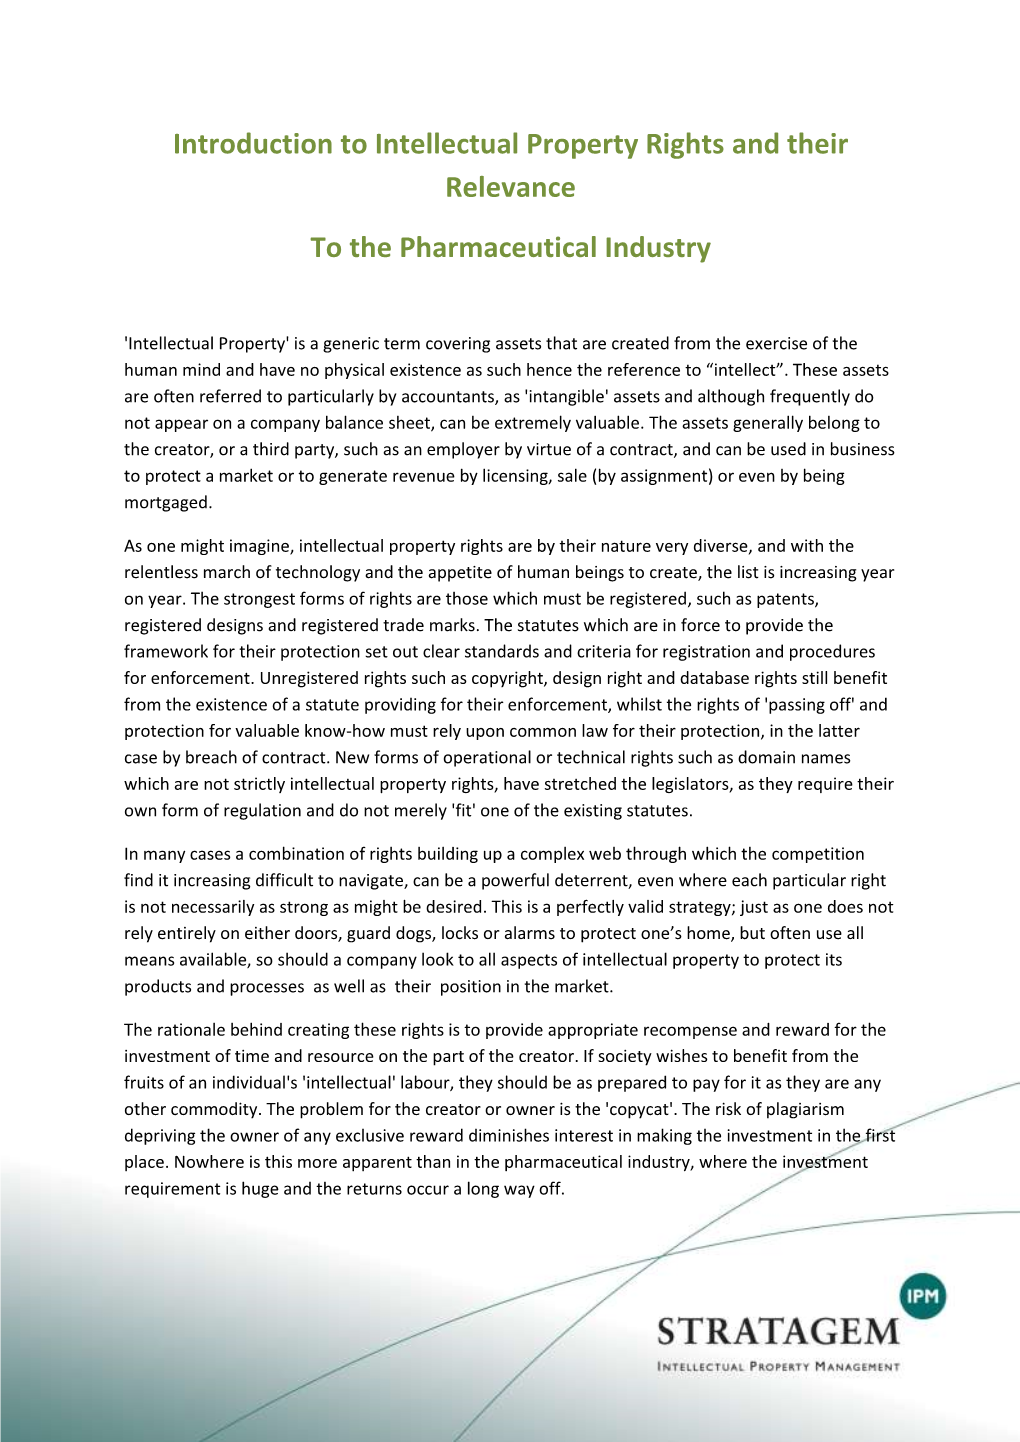 Introduction to Intellectual Property Rights and Their Relevance to the Pharmaceutical Industry